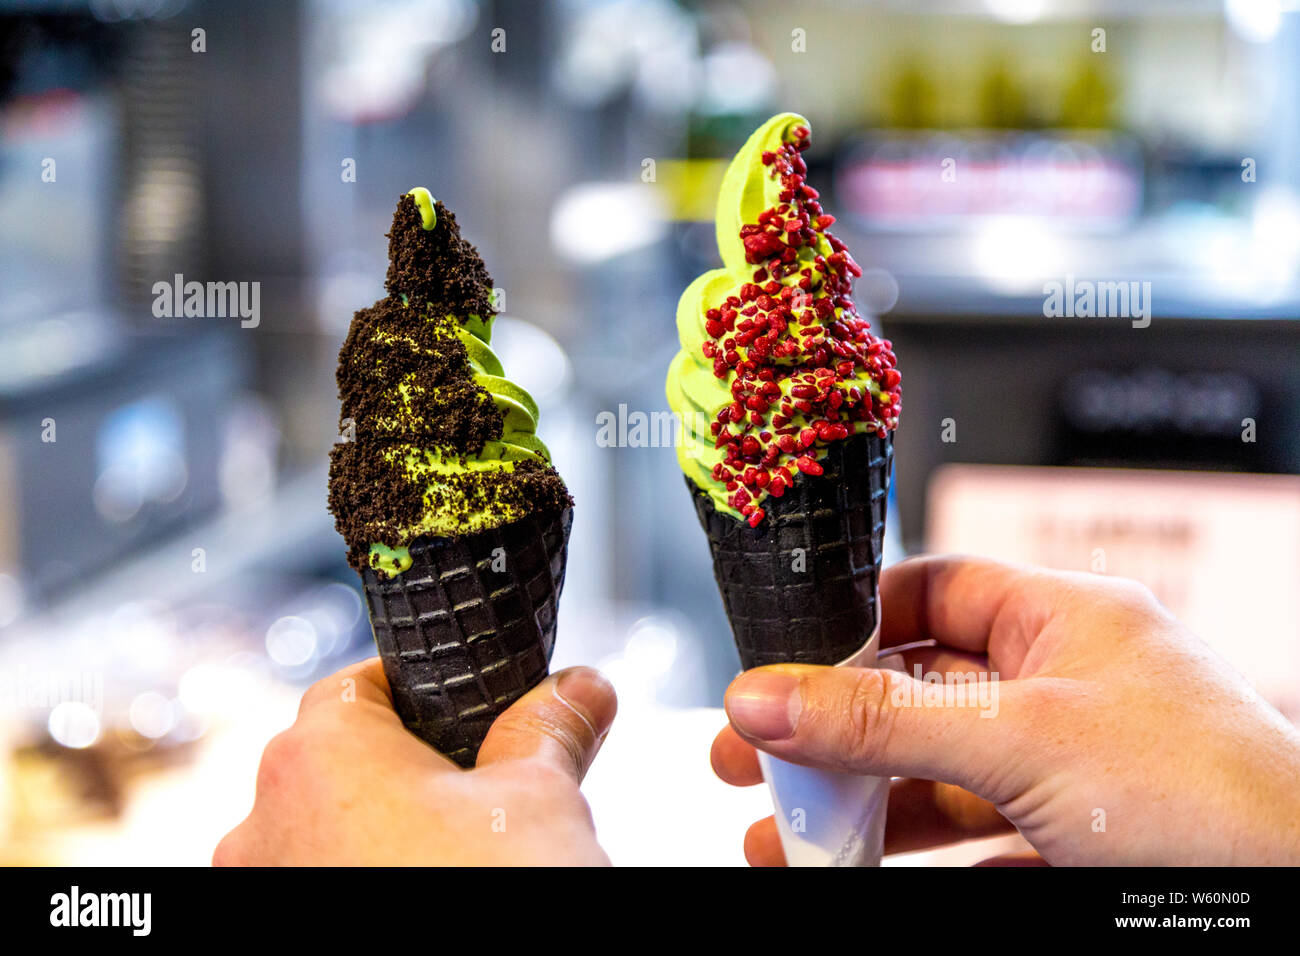 Matcha soft serve ice cream in black cone with toppings at Market Hall Victoria, London, UK Stock Photo